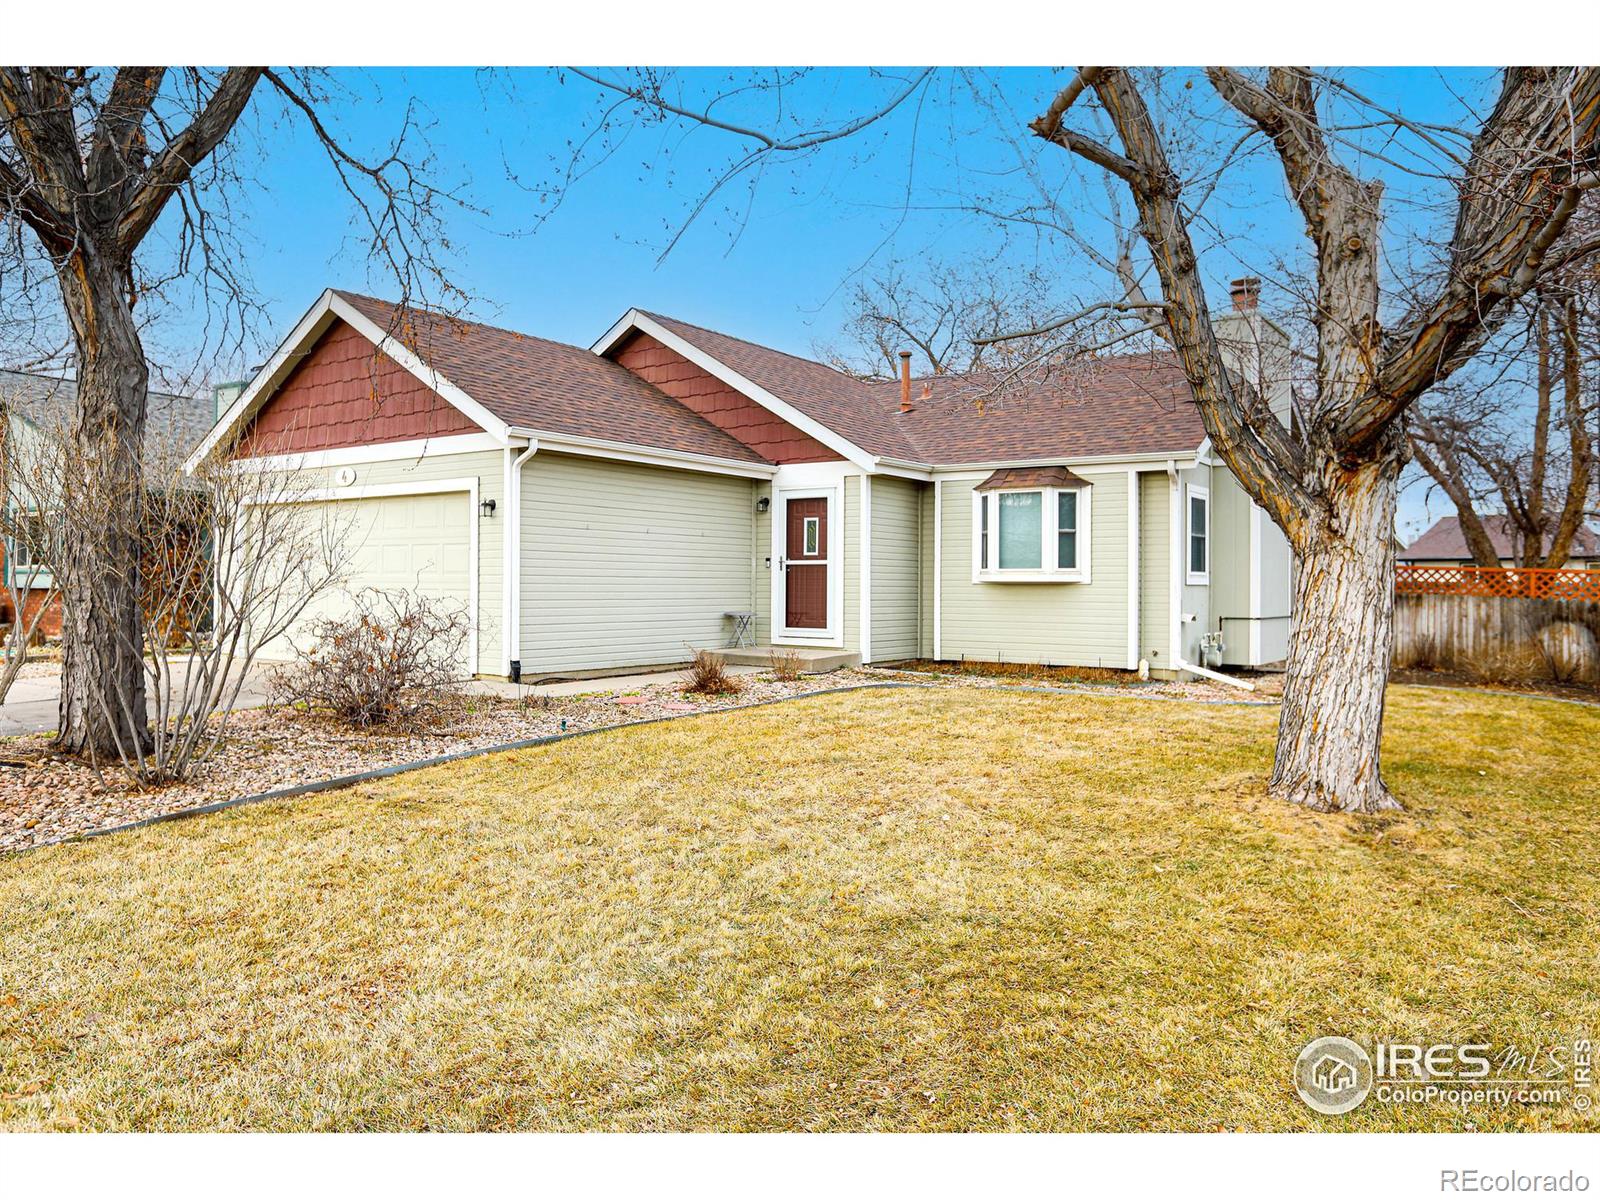 Report Image for 4  Orchid Court,Windsor, Colorado